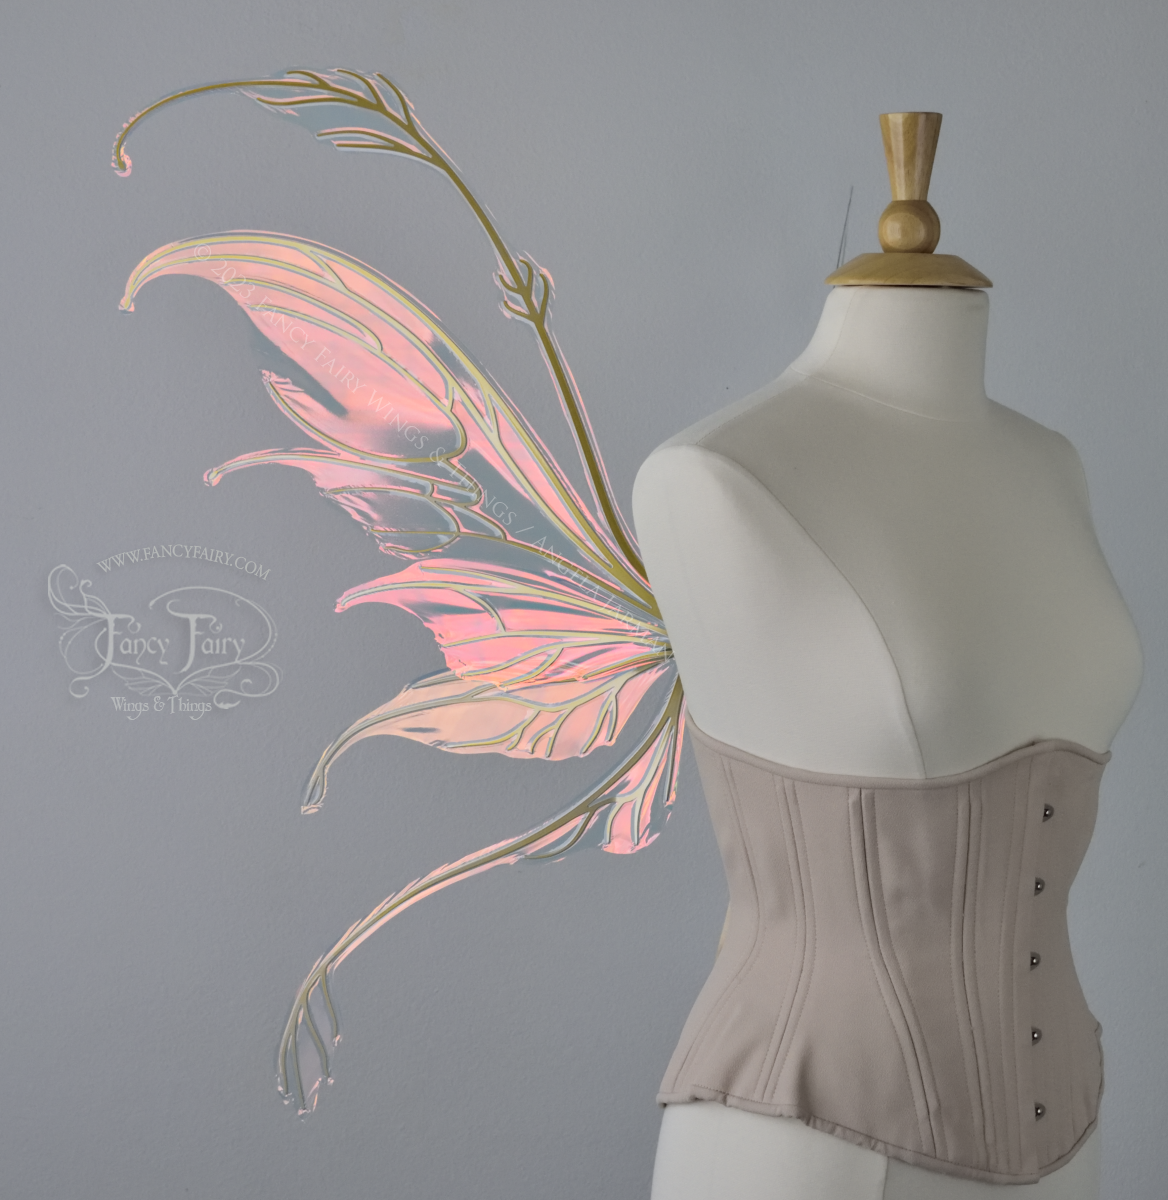 Left side view of an ivory dress form wearing an underbust corset & 'Fauna' pinkish iridescent fairy wings with gold veining